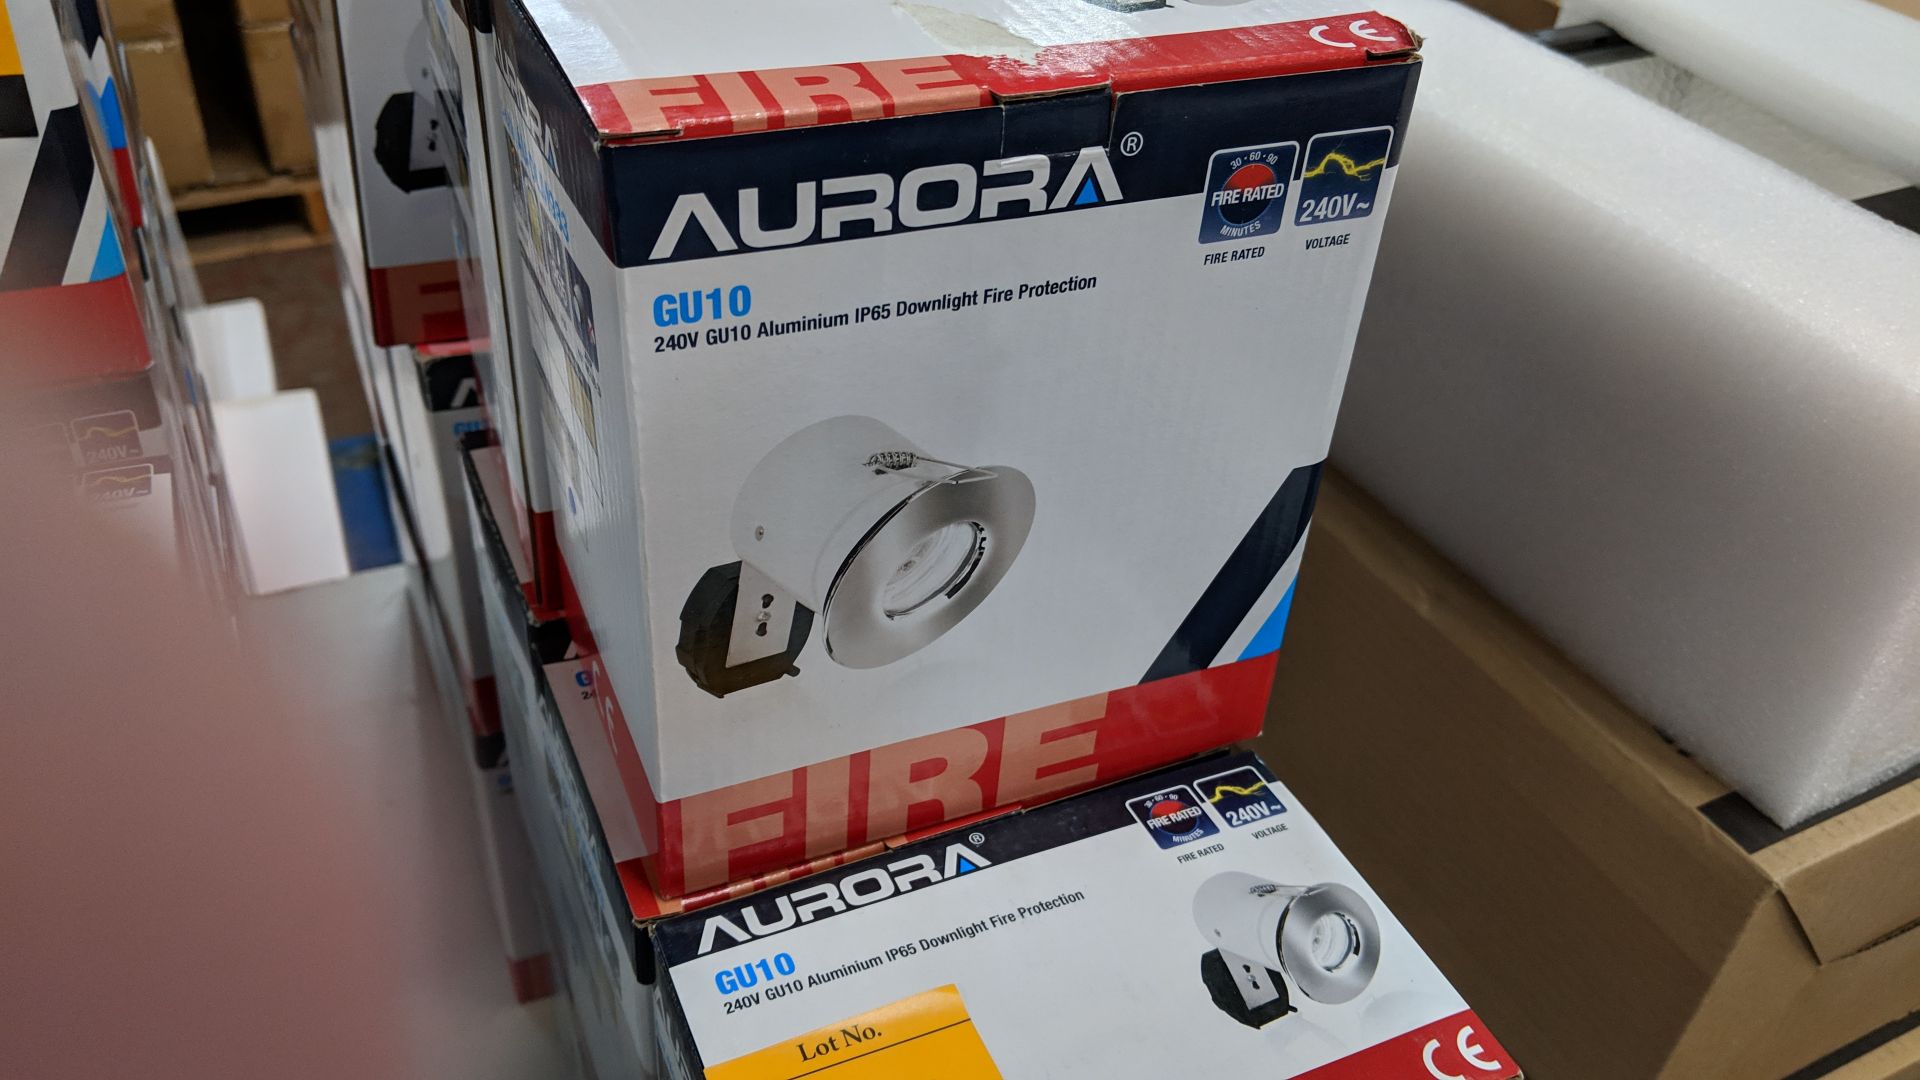 8 off Aurora GU10 240V aluminium IP65 fire protection downlights This lot is one of a number of lots - Image 3 of 3